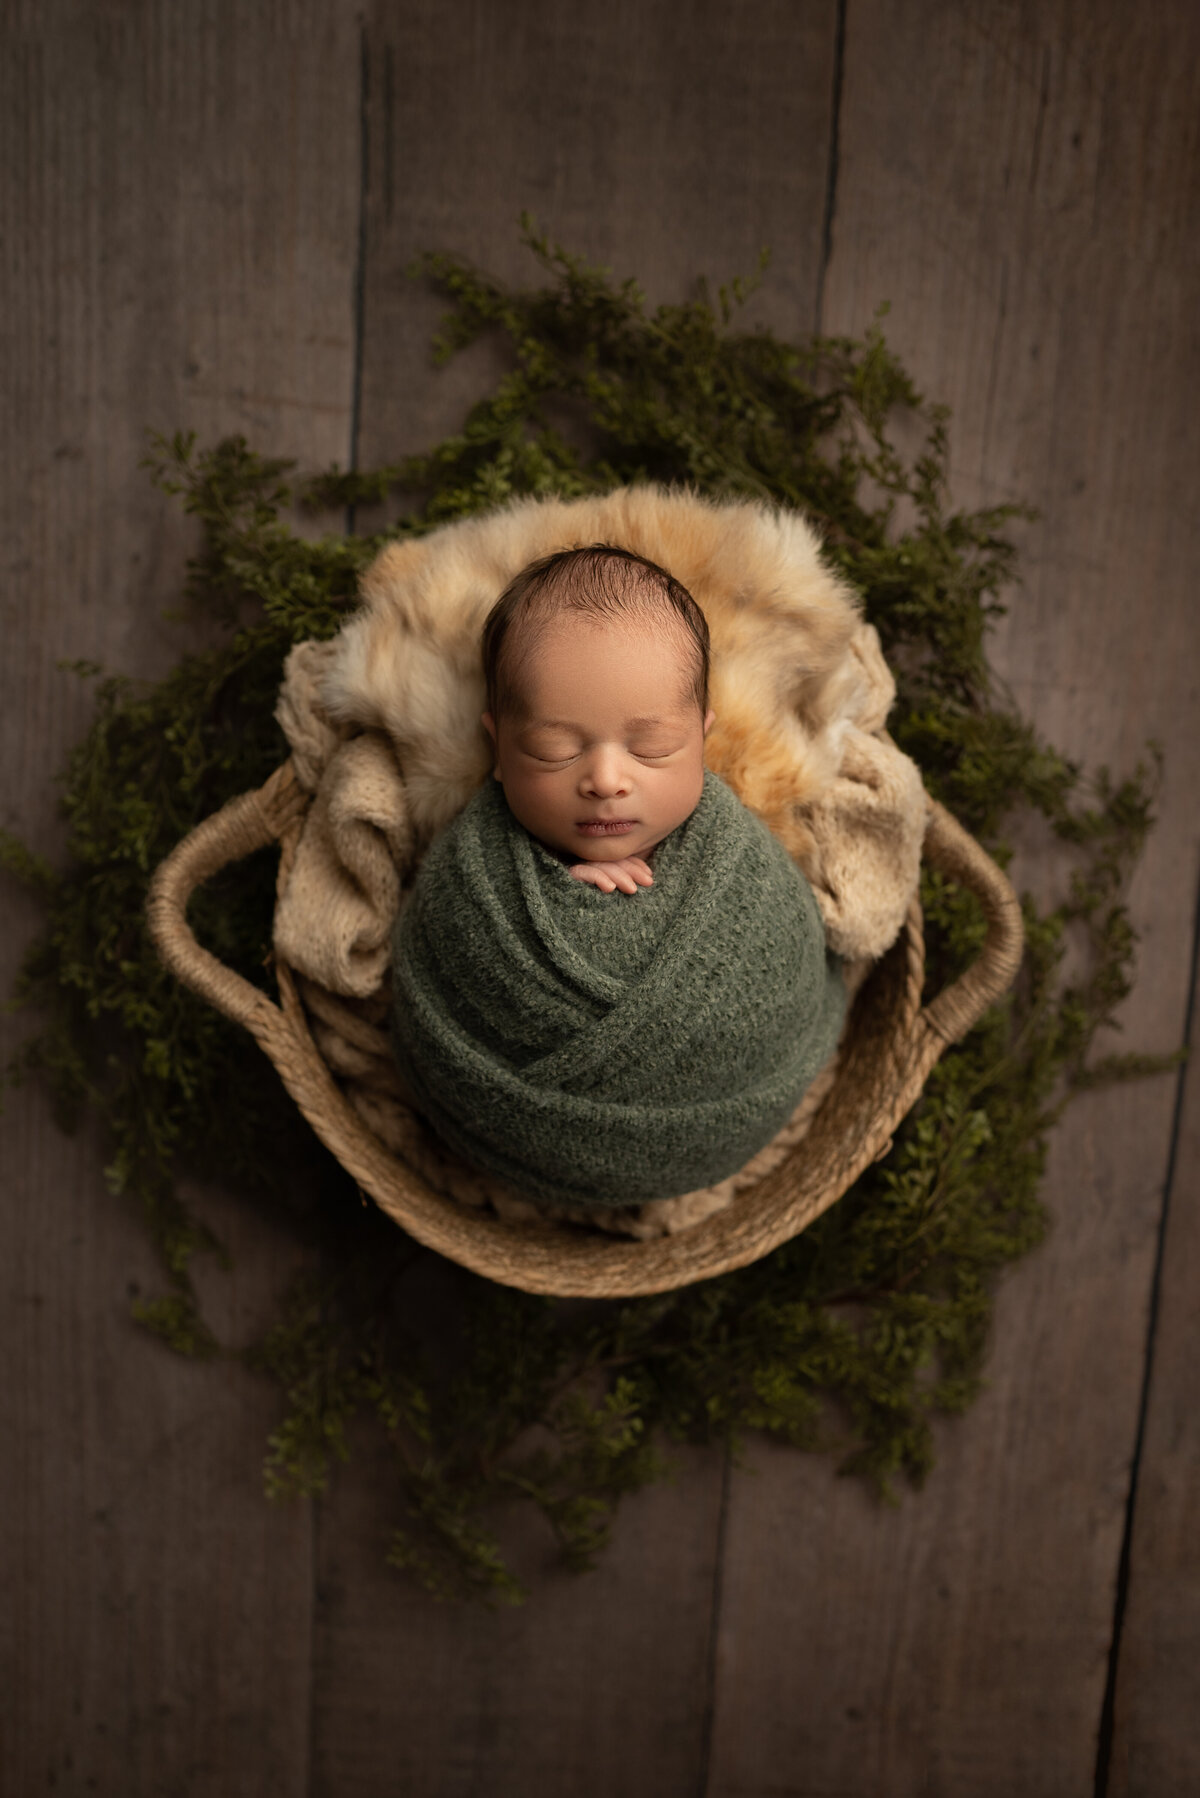 Katie Marshall, New Jersey's best newborn photographer captures a baby boy for his newborn fine art photoshoot. Baby boy is swaddled in an olive green knit with his fingers peeking out of the swaddle. He is sleeping peacefully and laying atop of faux furs in a basket.